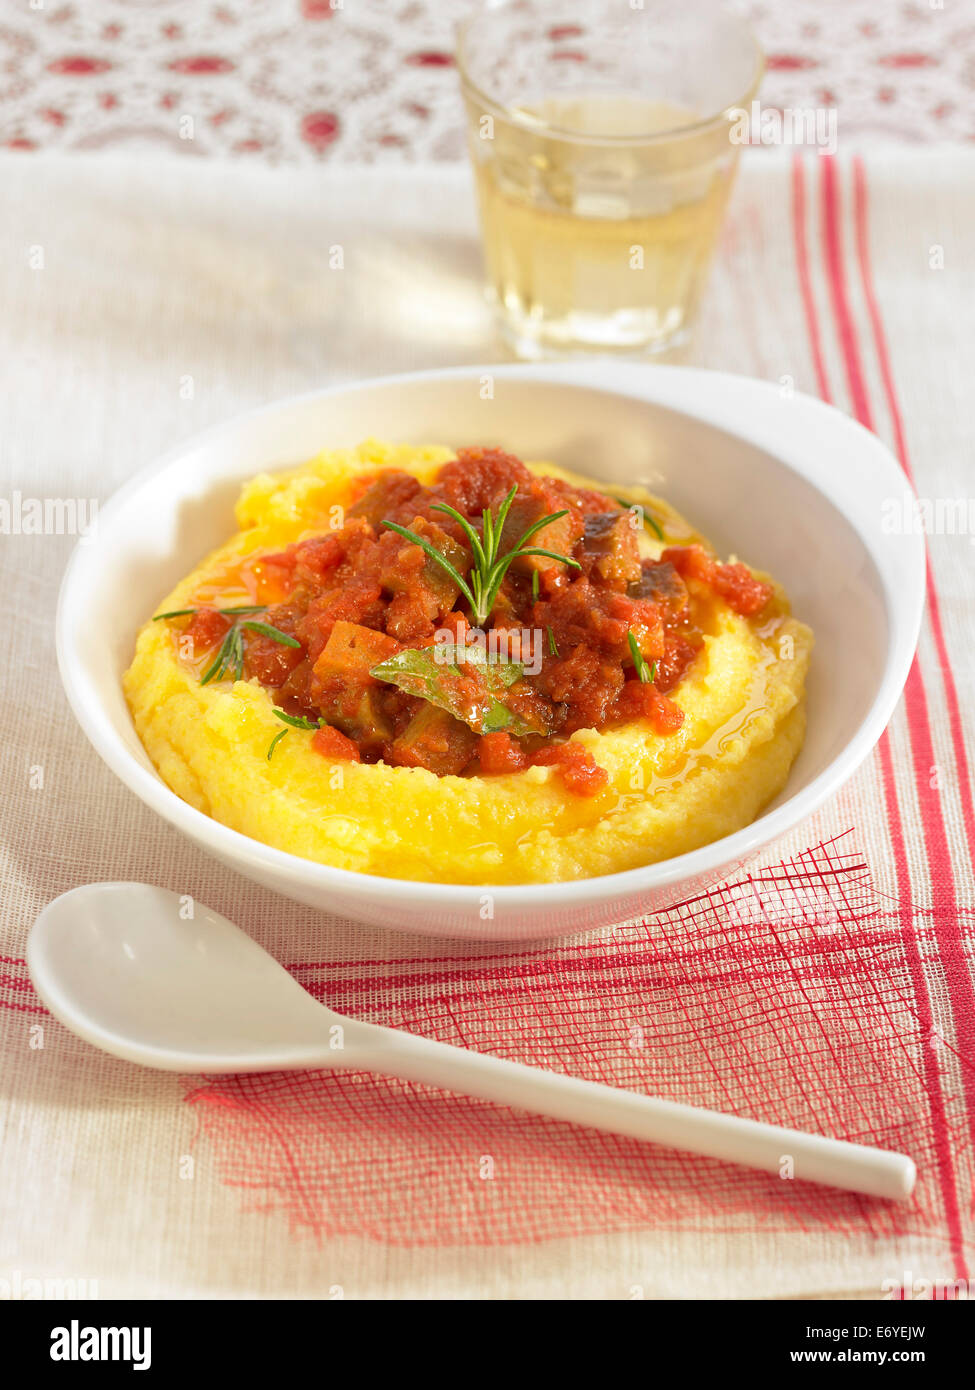 Mashed potatoes with squid in tomato sauce Stock Photo